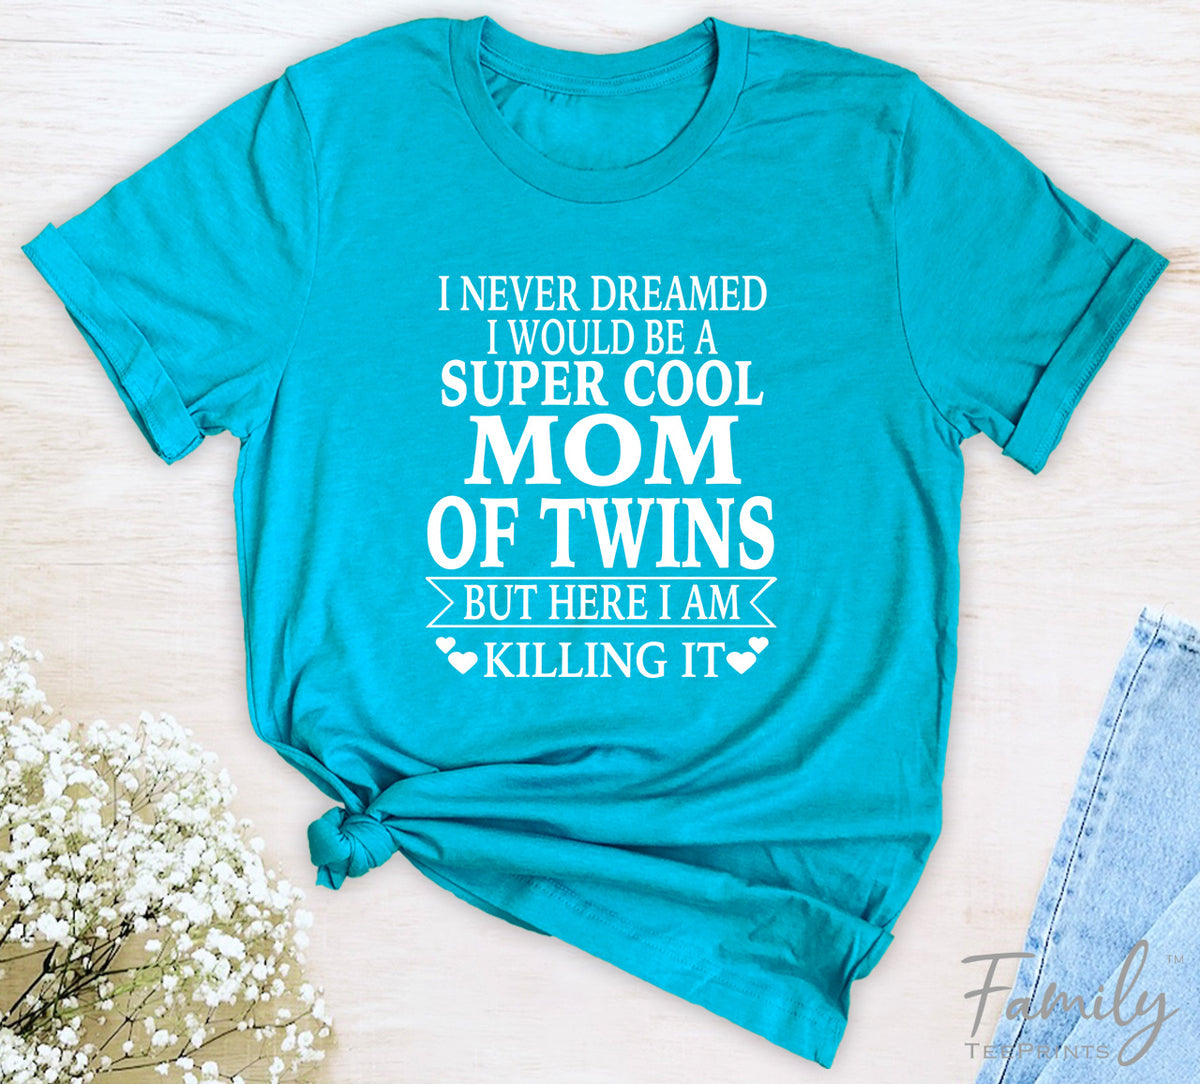 I Never Dreamed I'd Be A Super Cool Mom Of Twins...- Unisex T-shirt - Mom Of Twins Shirt - Gift For Mom Of Twins - familyteeprints